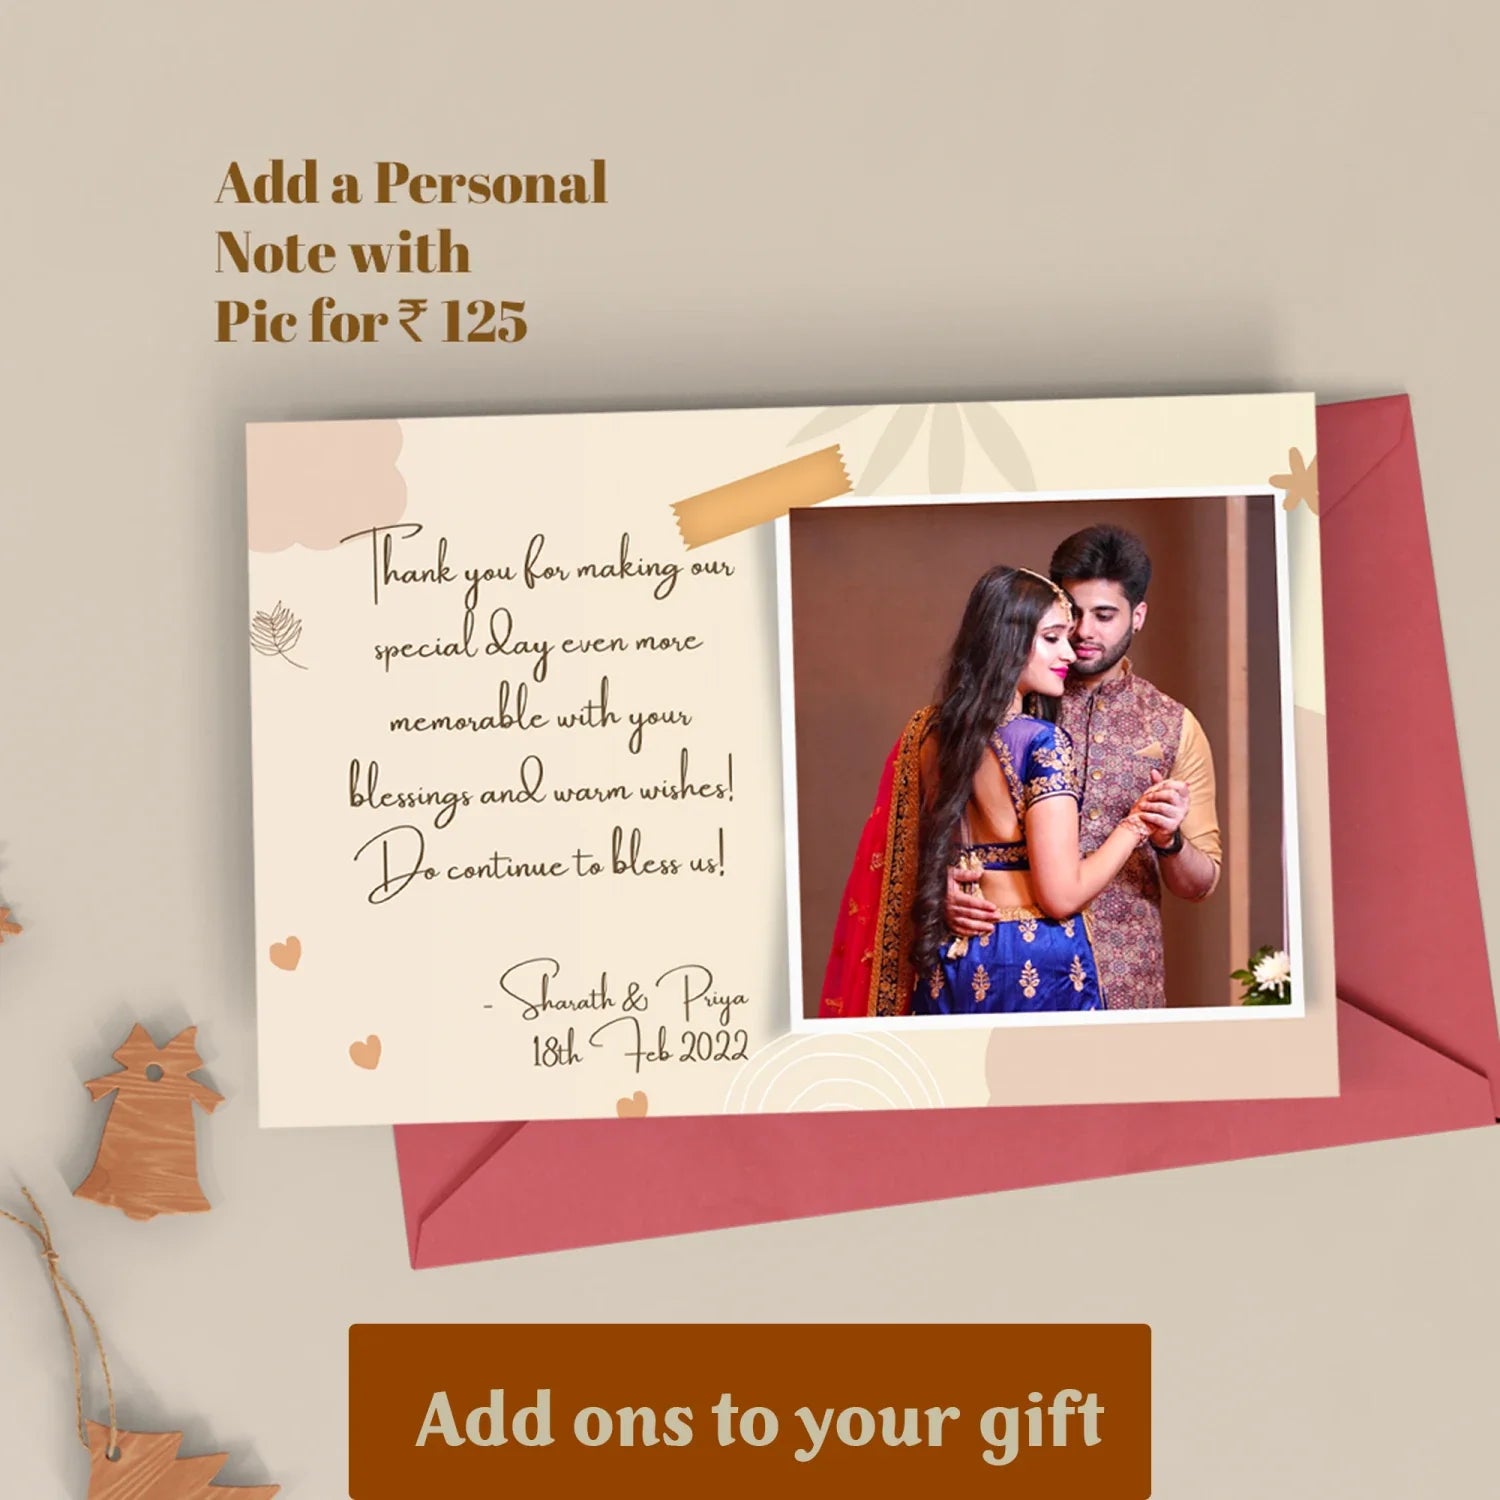 Personalized Men's Combo (3 pcs) - Tan.Add your personal note and polaroid picture to customise the gifts and give it a personal touch.